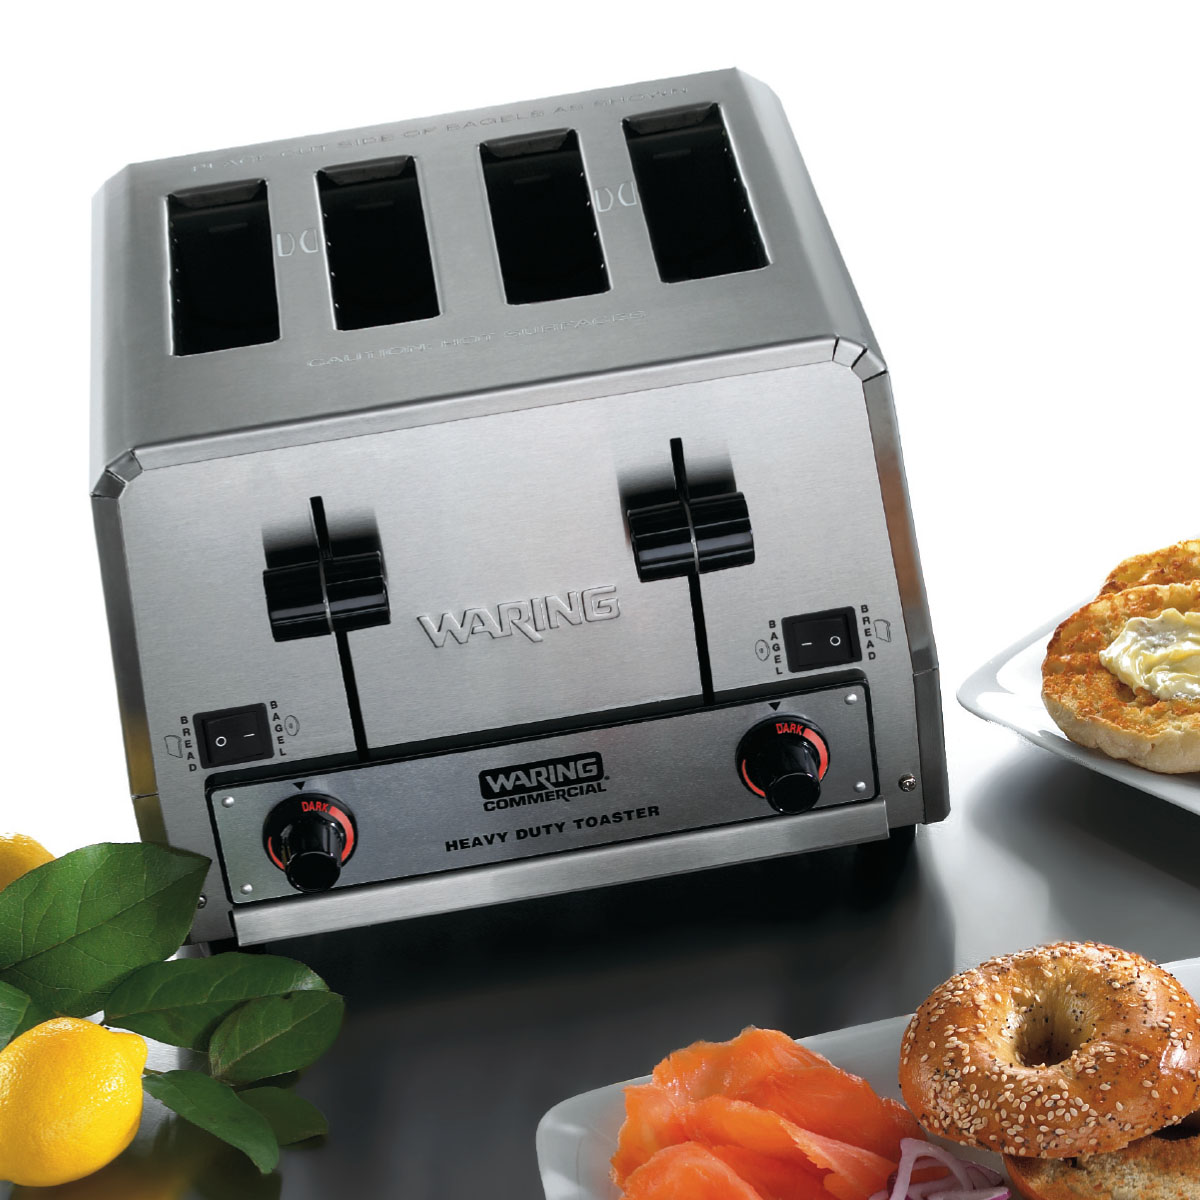  Hakka Toaster 4 Slice, Heavy-Duty Stainless Steel Toaster  Commercial Toaster with Extra Wide Slots with Auto Shut-off/Cancel Button &  Removable Crumb Tray, 1800W/120V: Home & Kitchen